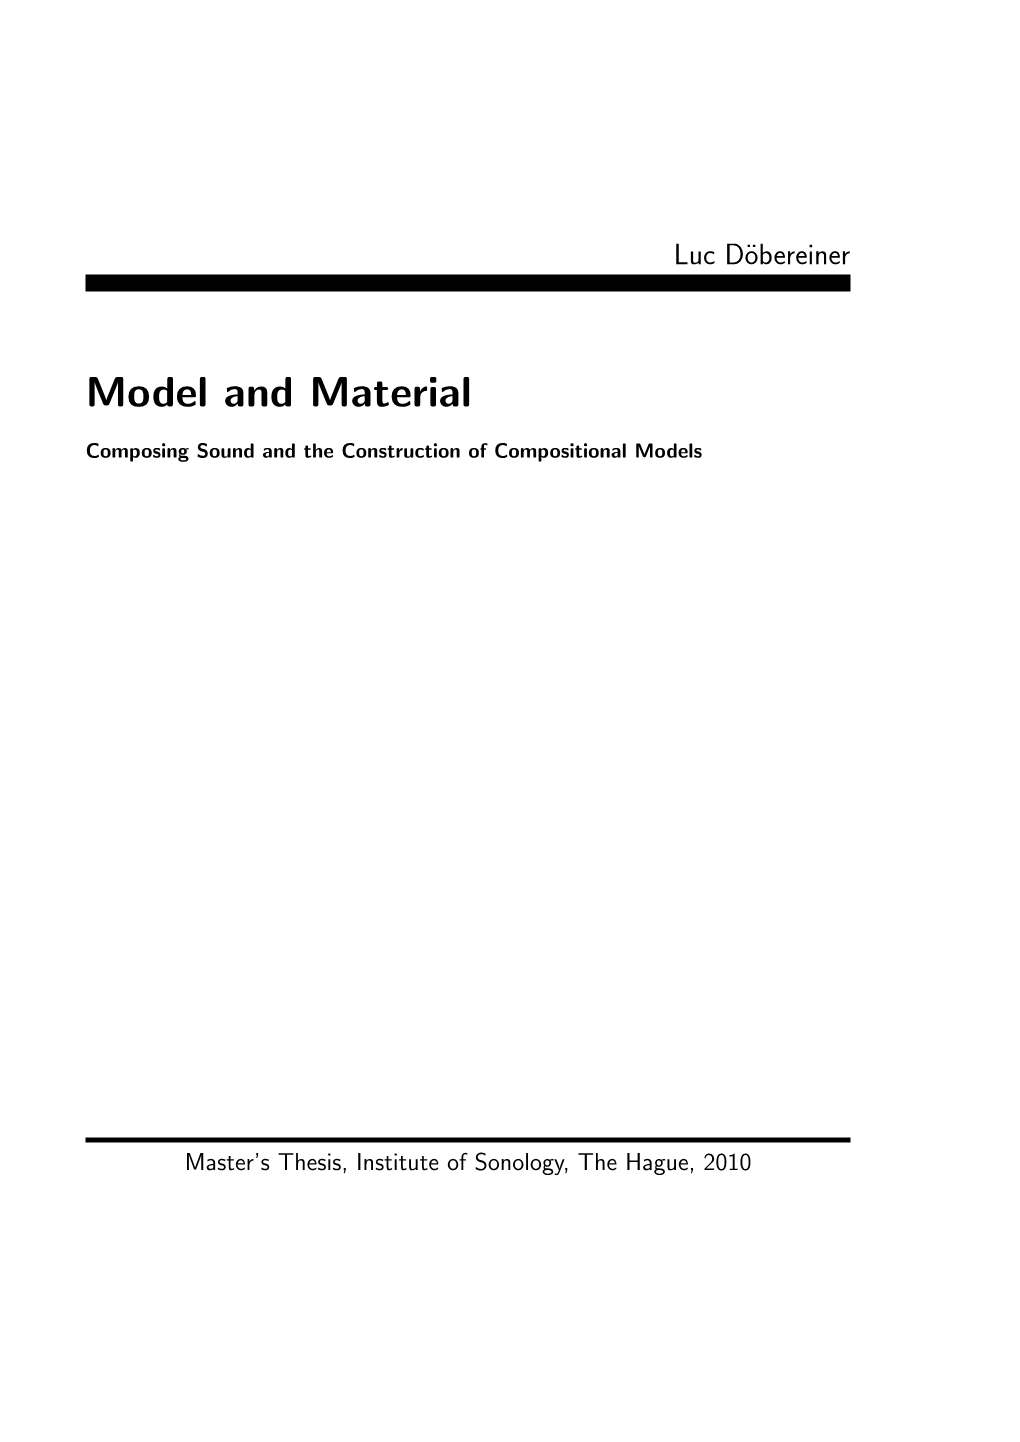 Model and Material